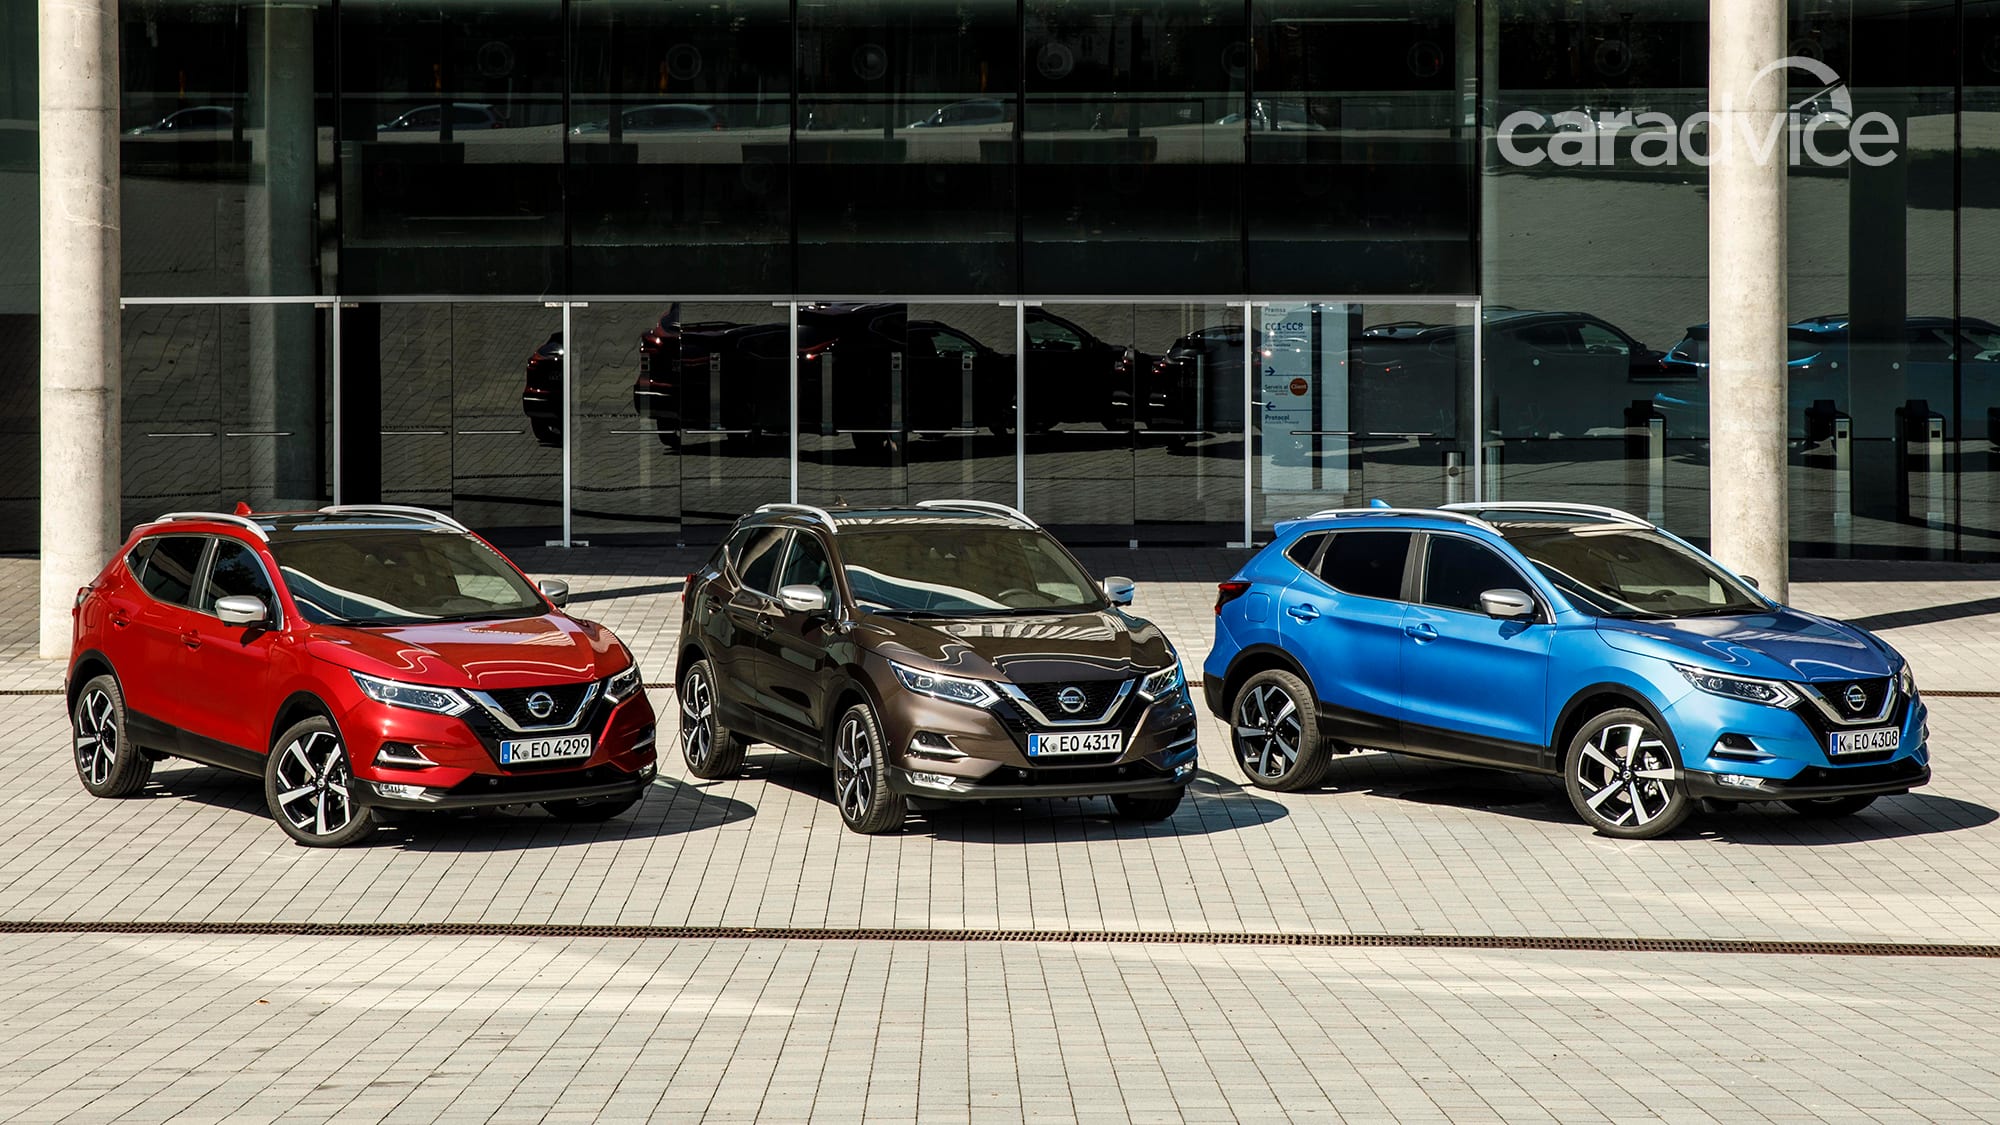 2019 Nissan Qashqai gets Apple CarPlay, Android Auto in